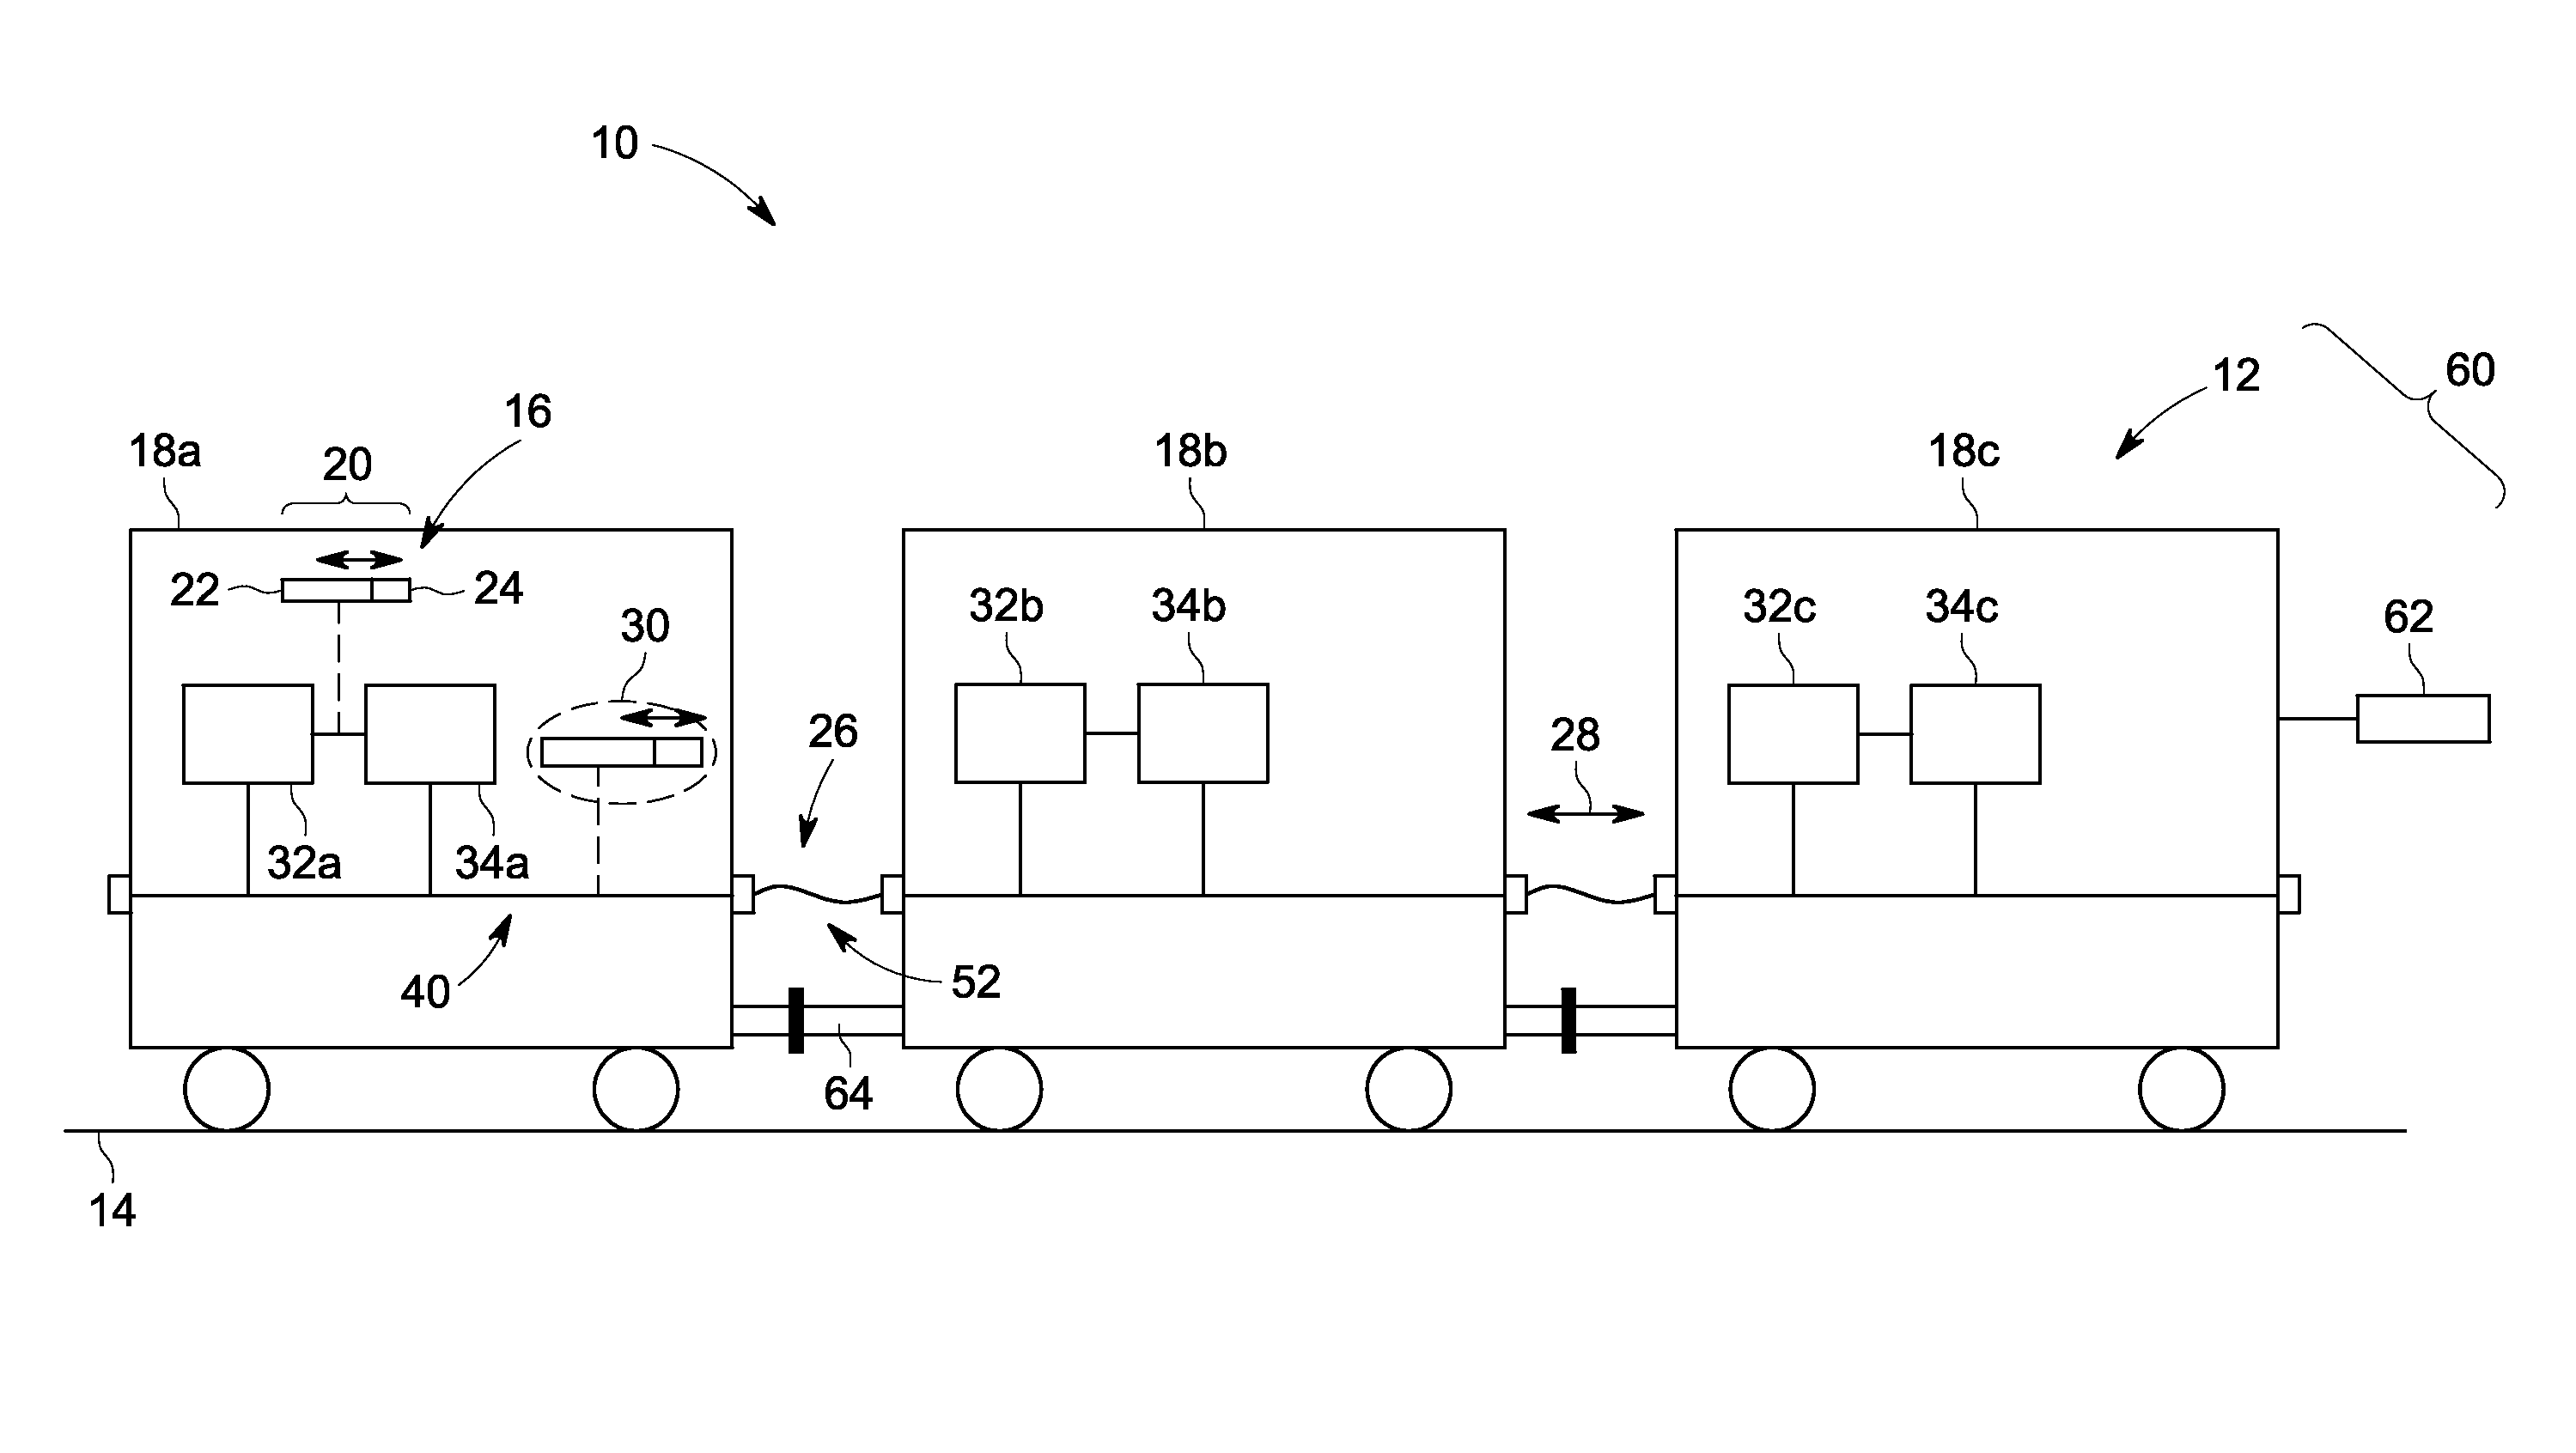 System and method for communicating data in a train having one or more locomotive consists